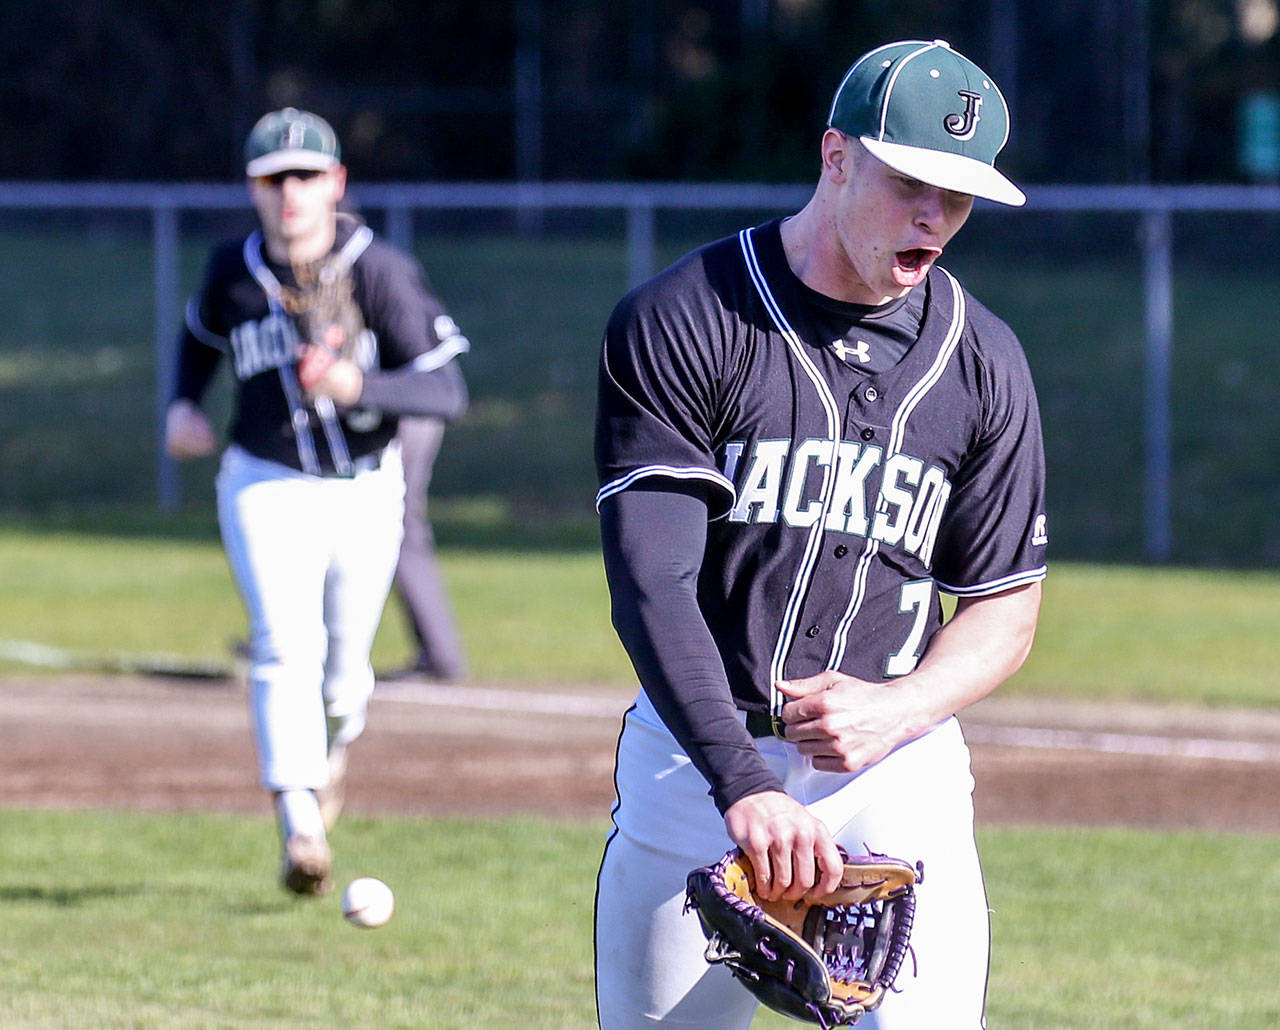 Jackson pitcher Jacob Bogacz celebrates a strikeout as he makes his way to the dugout during a game against Glacier Peak on March 30, 2017, at Jackson High School in Mill Creek. (Kevin Clark / The Herald)